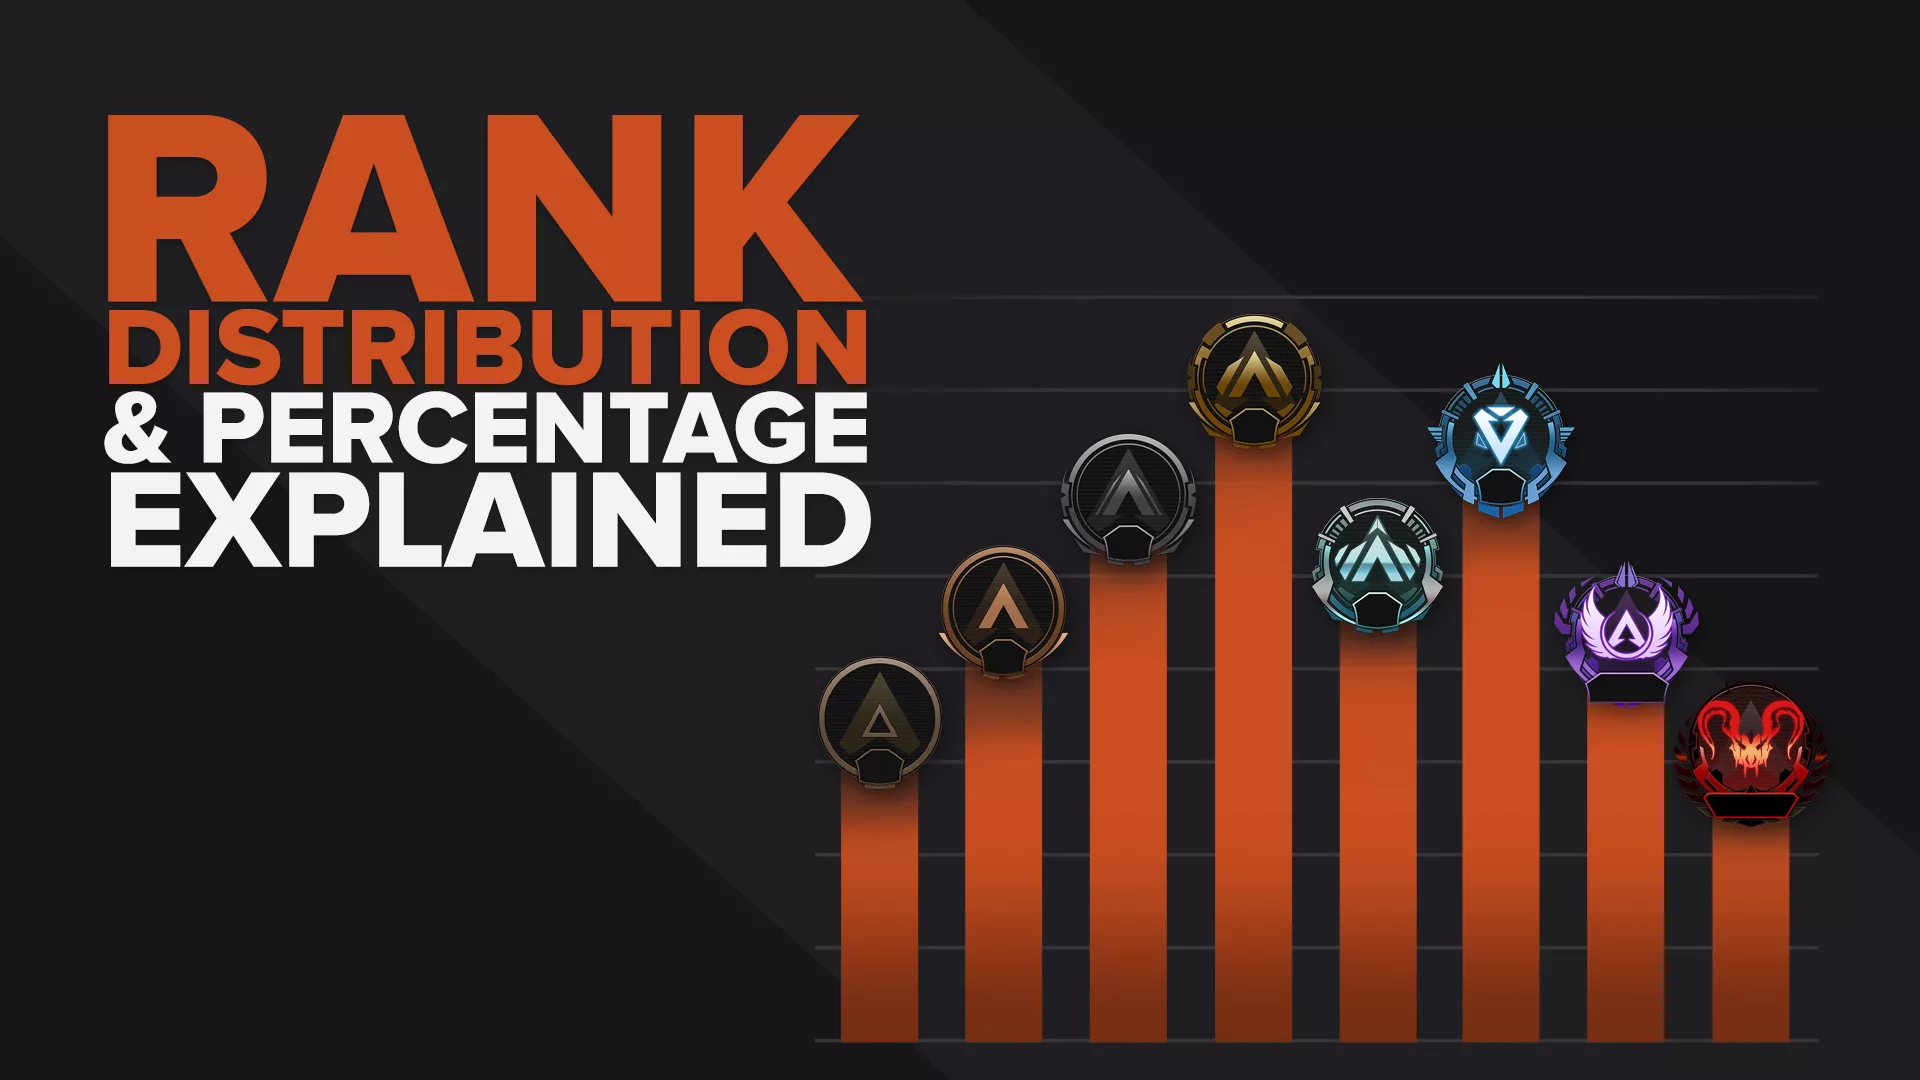 The Apex Legends Rank Distribution & Percentage Explained and Visualized